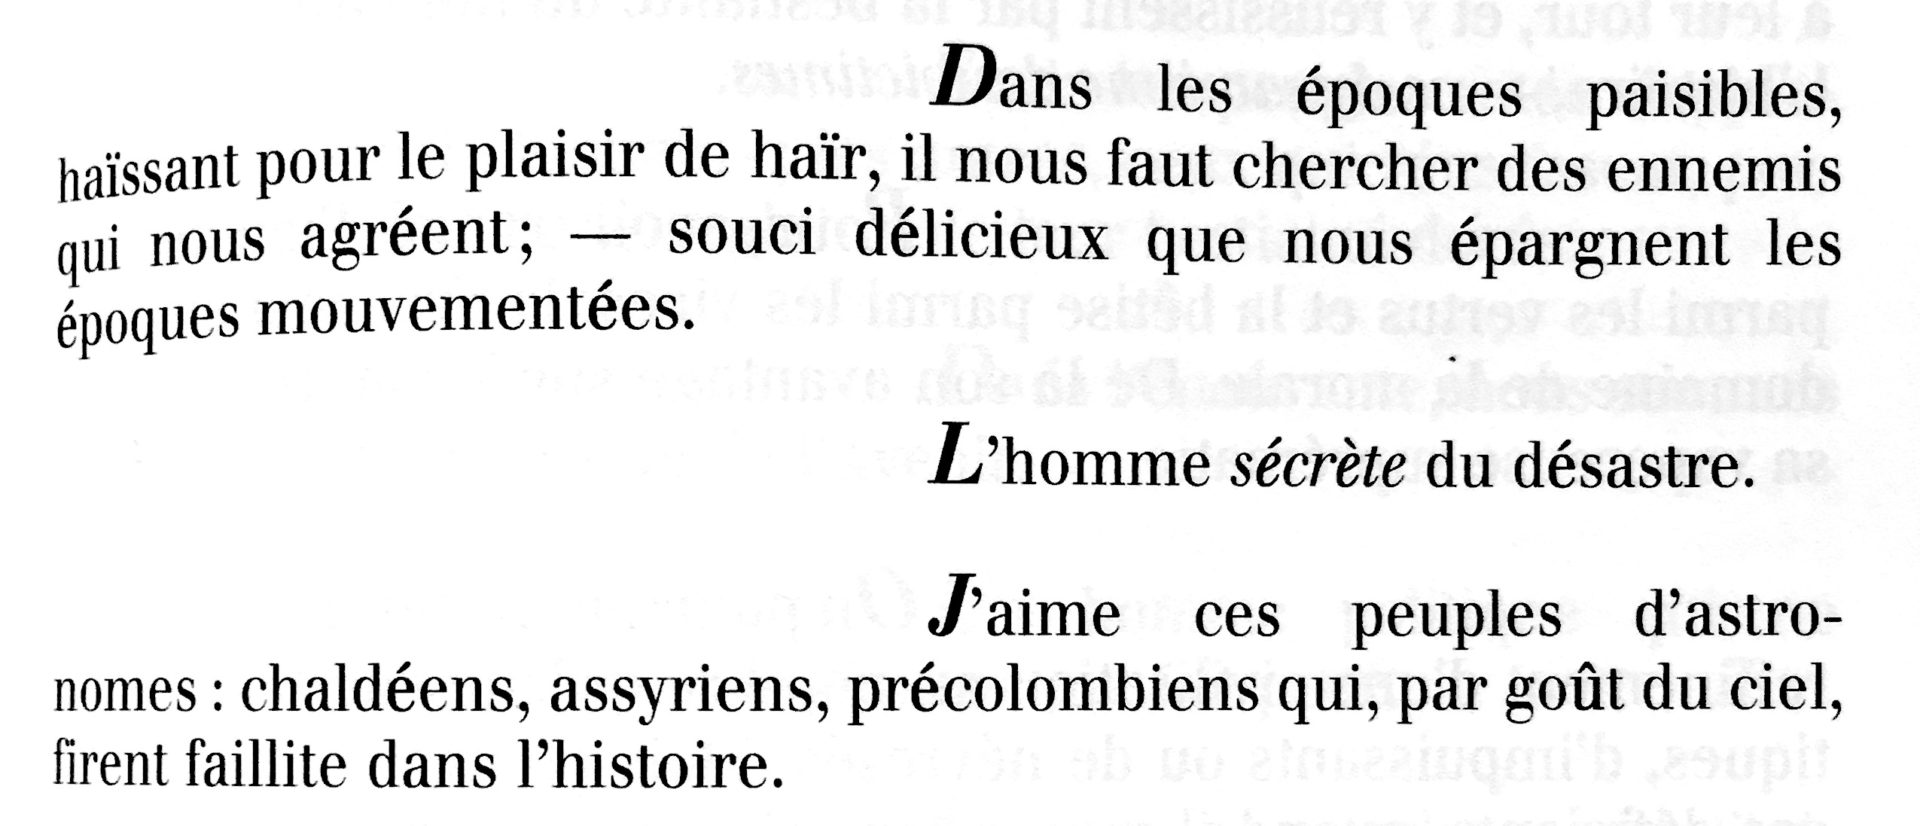 Image from the French edition of Cioran’s Complete Work with the quote (in French): “Man secretes disaster”